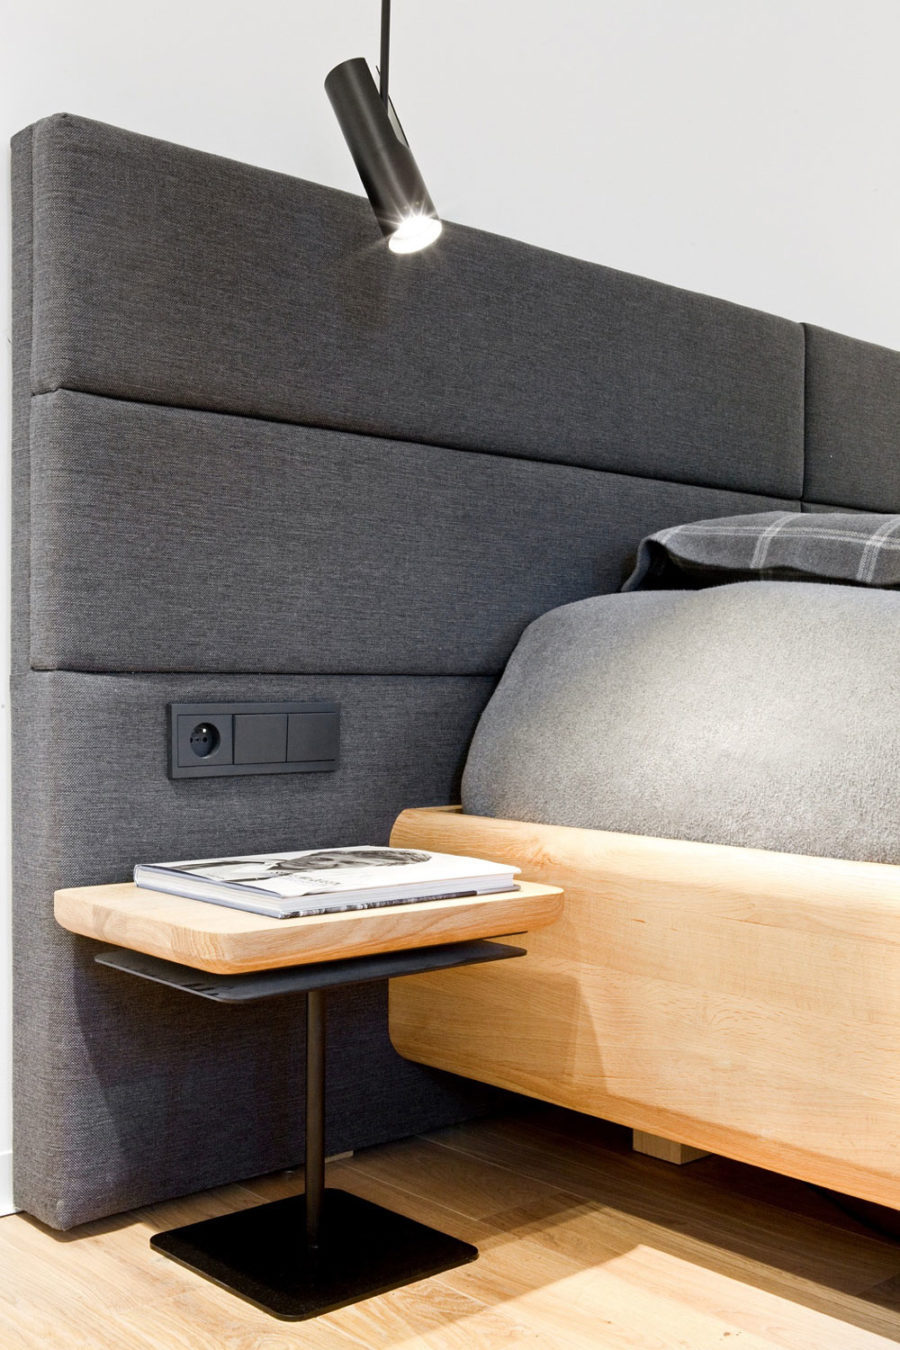 Soft upholstered headboard includes an electric outlet and light switches